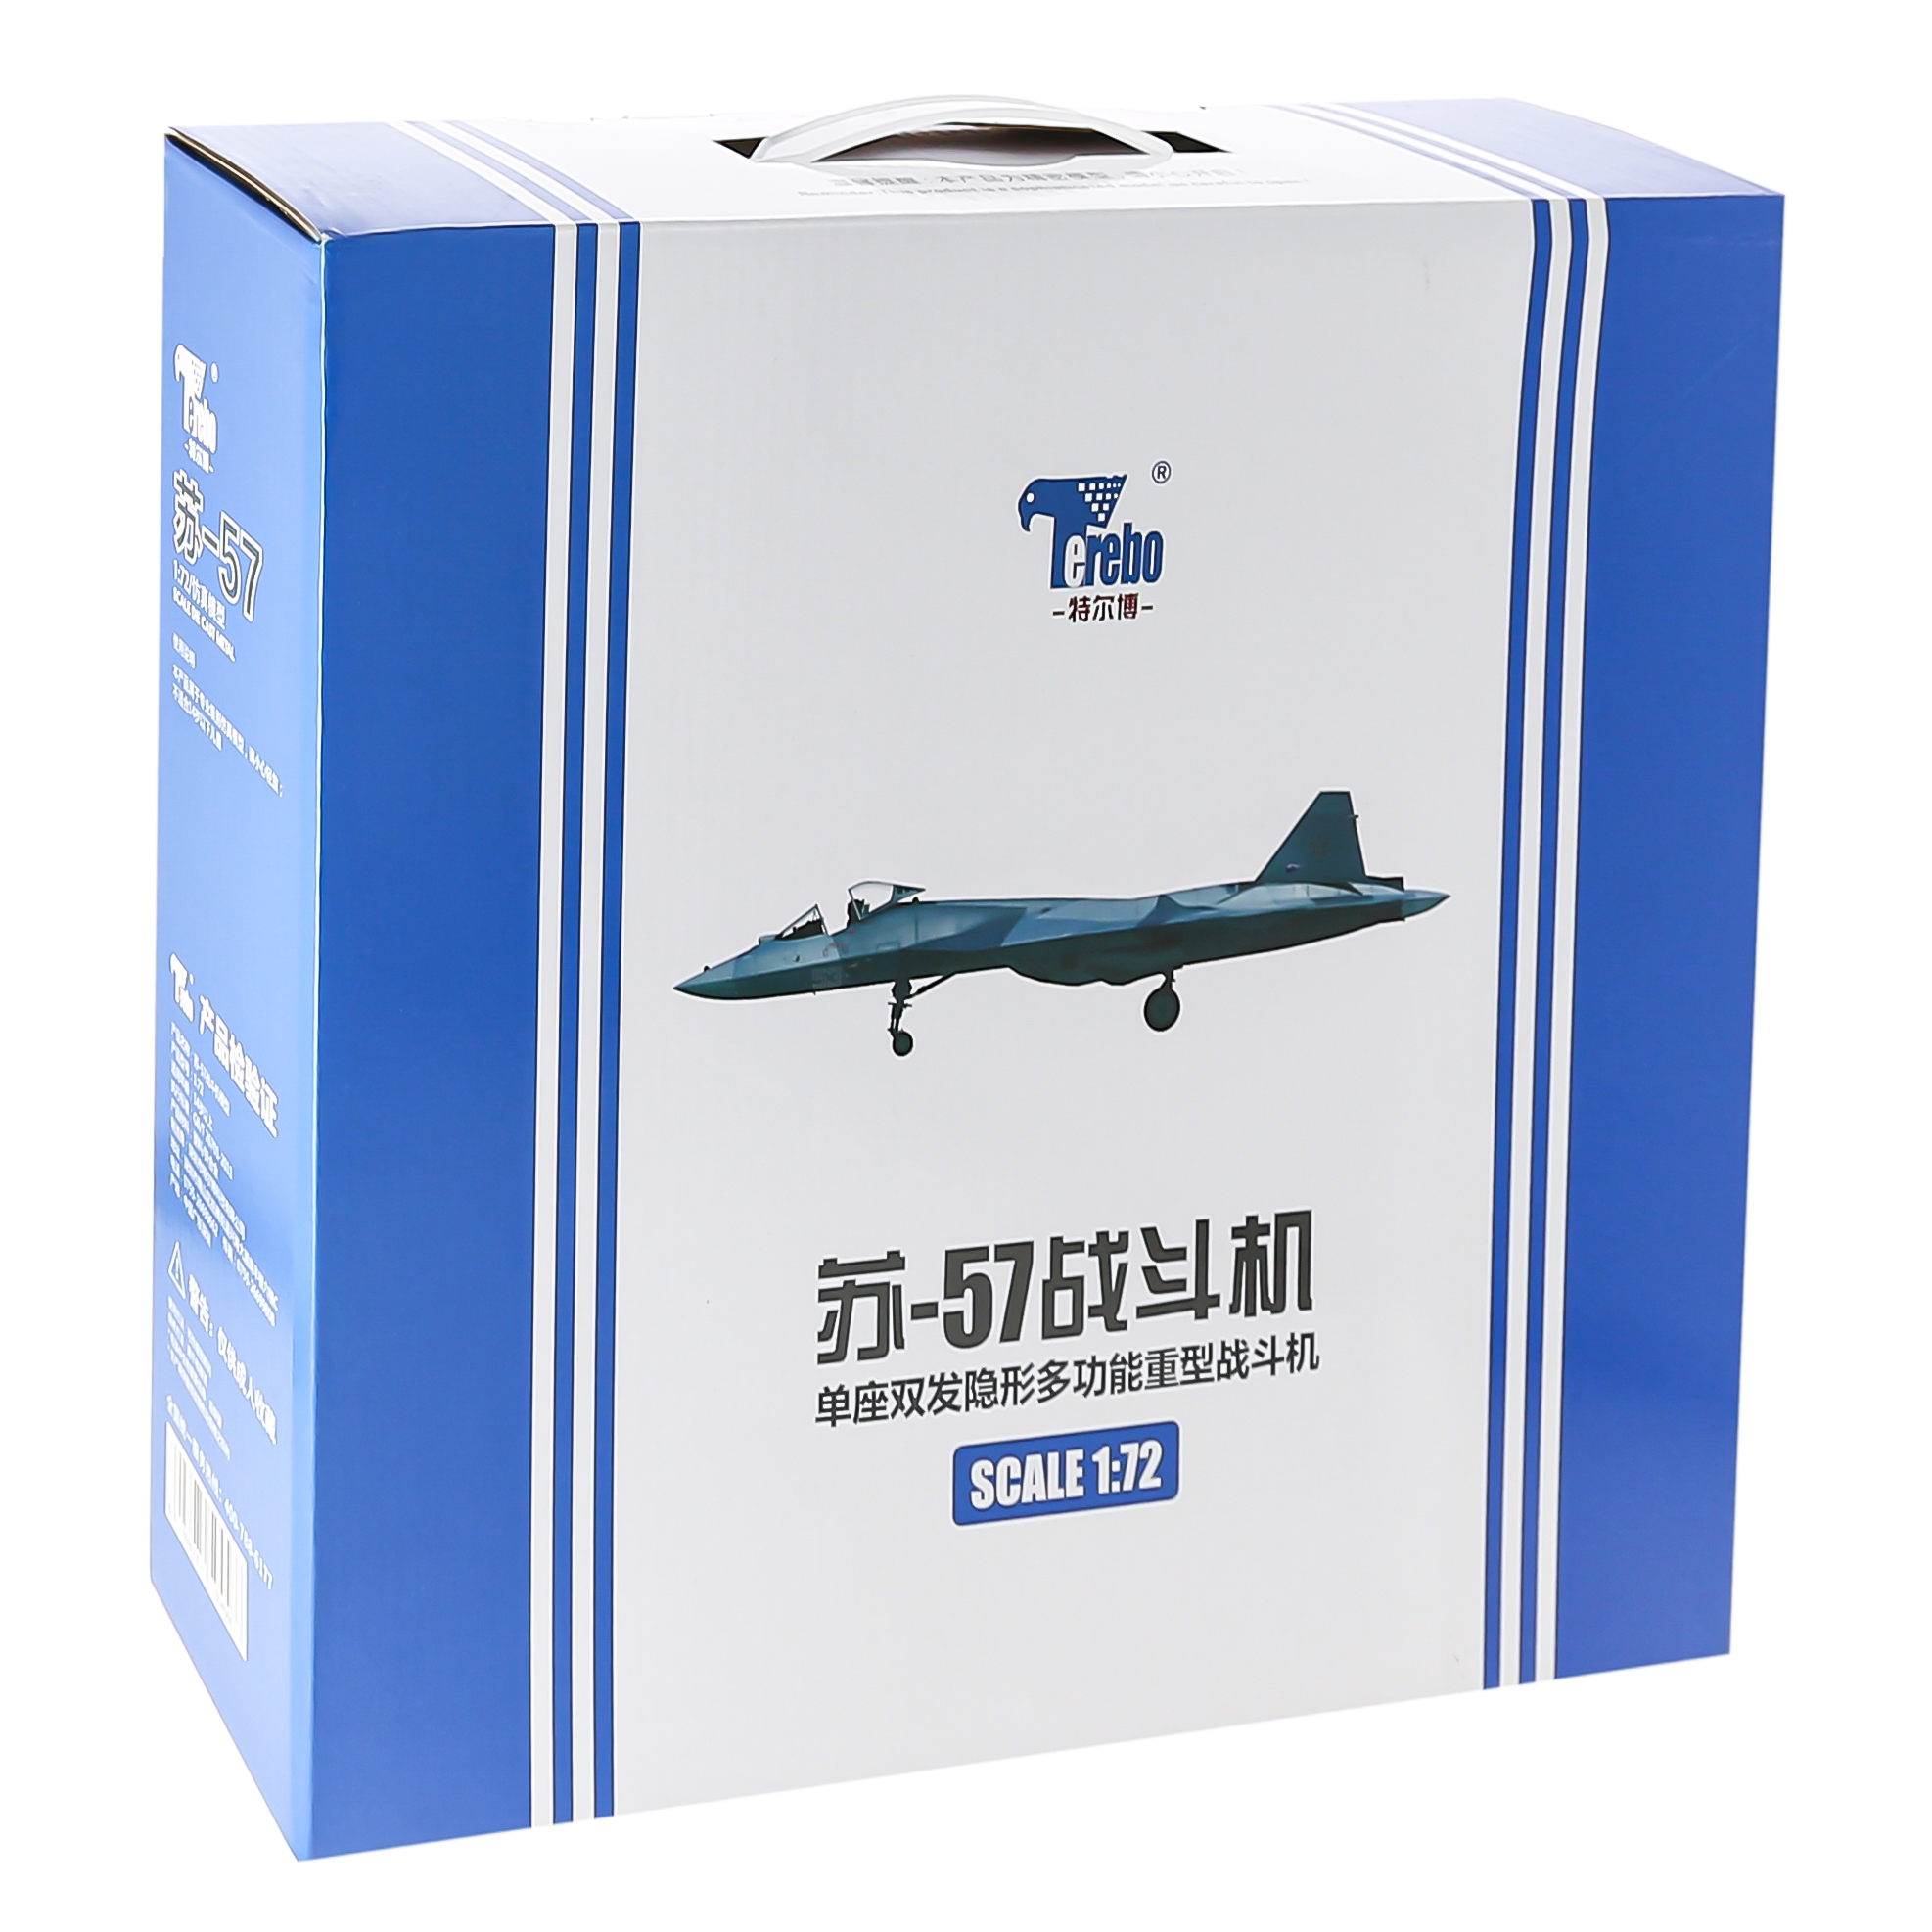       -57 (-50), ,  1:72.  28 . Model of the fifth-generation fighter aircraft of Russia Su-57 (T-50), metal, scale 1:72. Length 28 cm. # 8 hobbyplus.ru